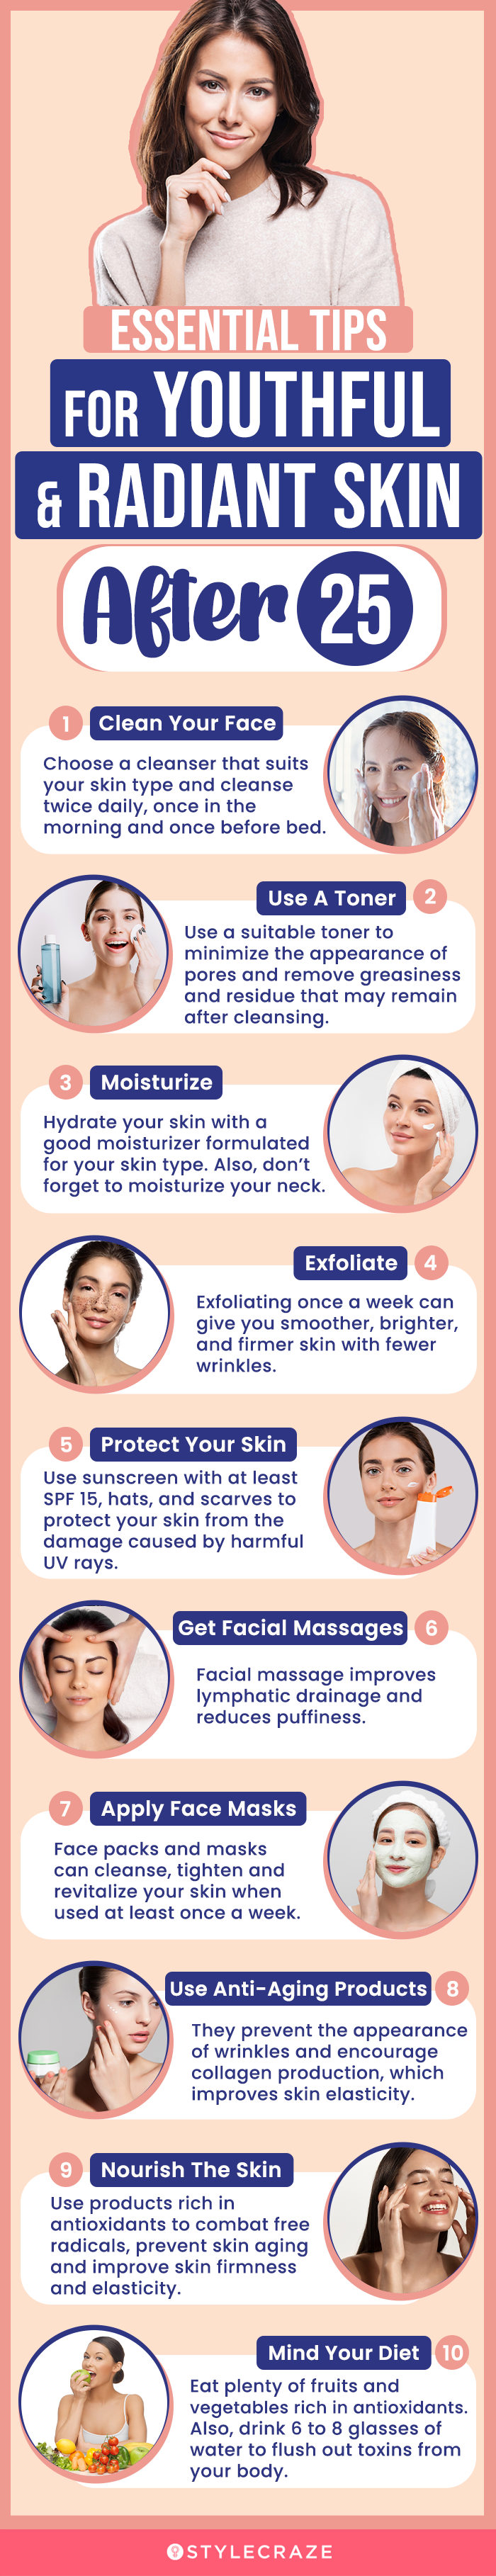 essential tips for youthful and radiant skin after 25 (infographic)